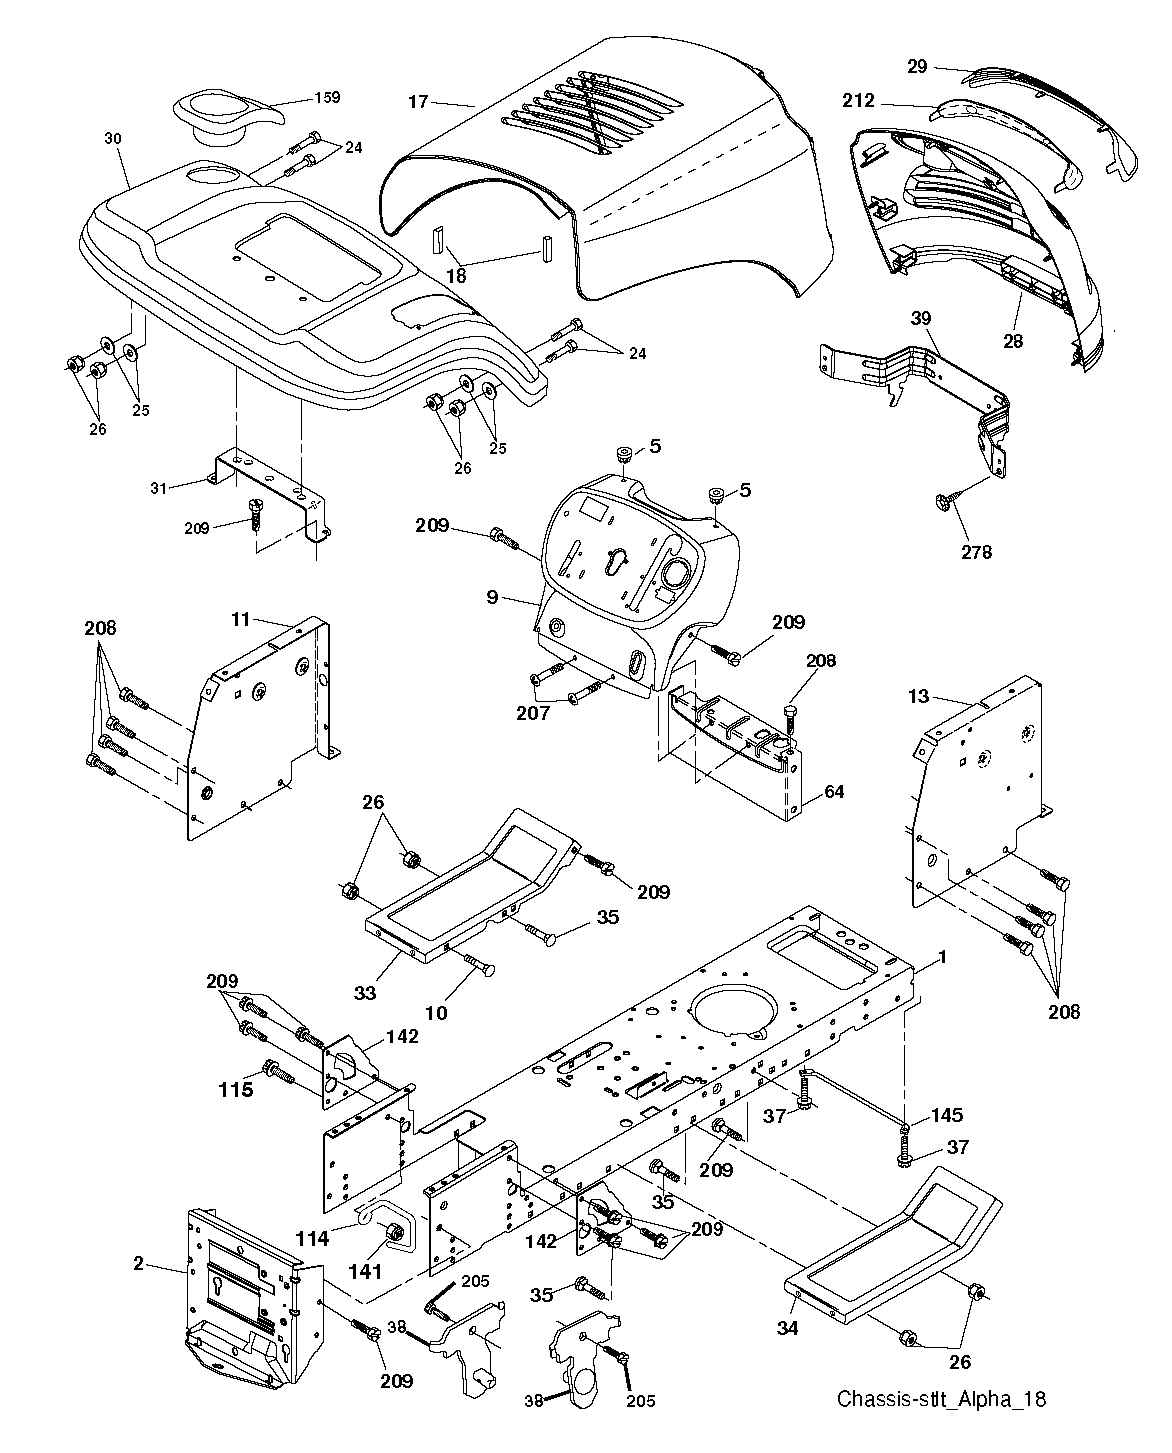 Chassis and appendix 579841401, 532176554, 532155272, 532433353, 872140608, 532174996, 532181719, 532406179, 532184921, 596564401, 734117201, 596322601, 532426741, 532195402, 532194589, 532136619, 532182507, 532182508, 596136001, 596030701, 532175710, 532187568, 532154798, 532158112, 817060620, 532409149, 532175702, 532409167, 532185635, 596564001, 817670508, 817670608, 817000612, 532187569, 596321701, 532005479, 532187801